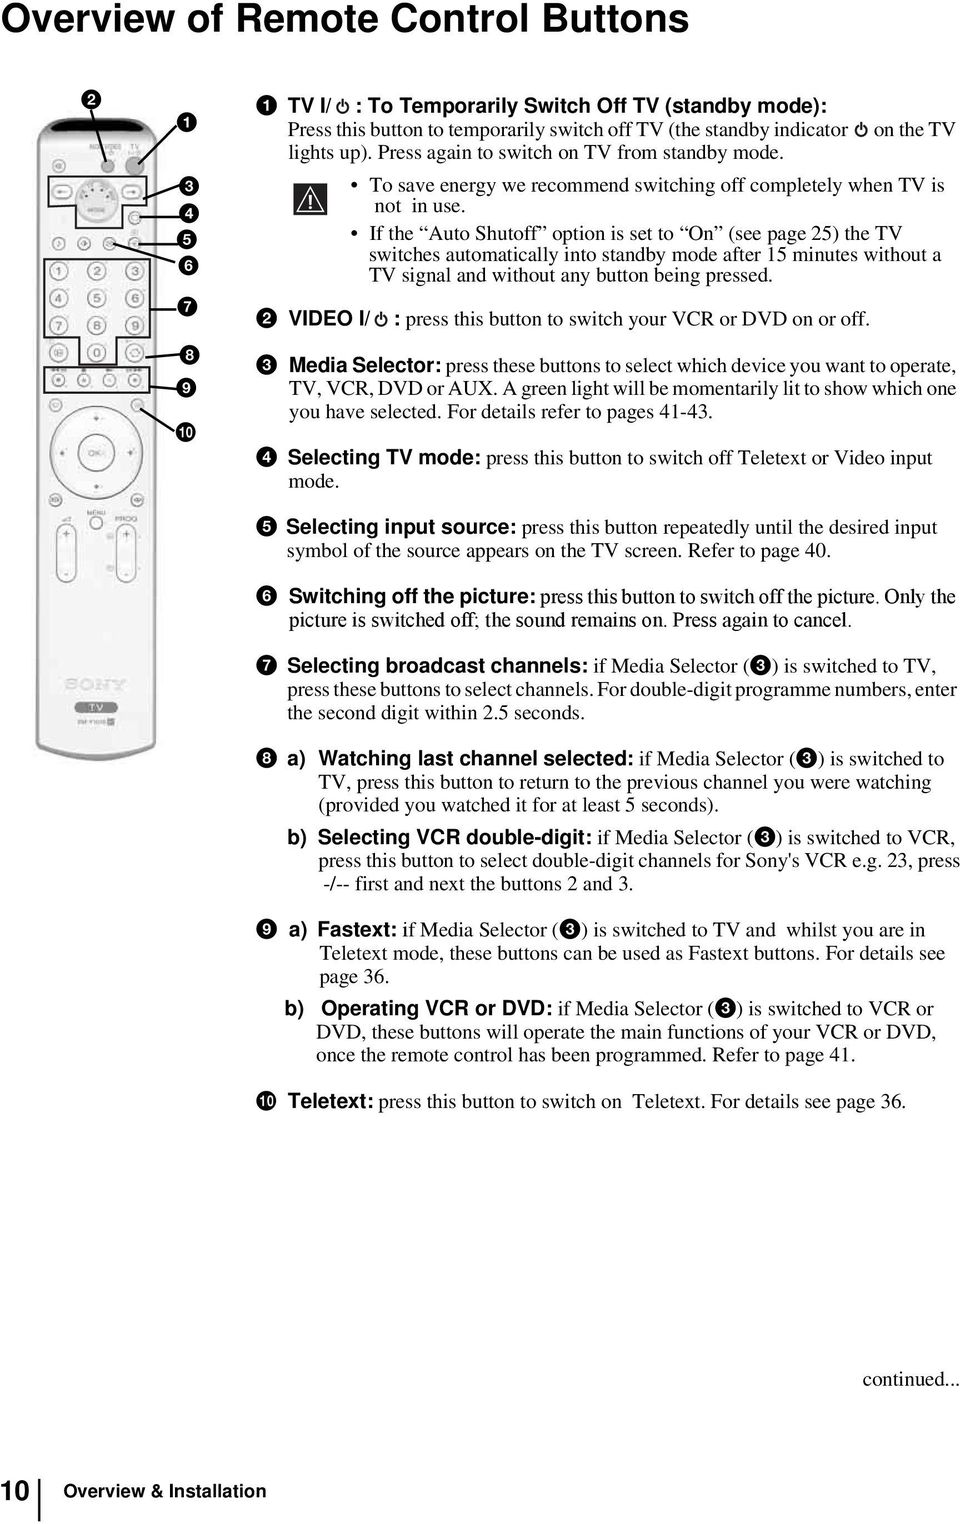 If the Auto Shutoff option is set to On (see page 25) the TV switches automatically into standby mode after 15 minutes without a TV signal and without any button being pressed.